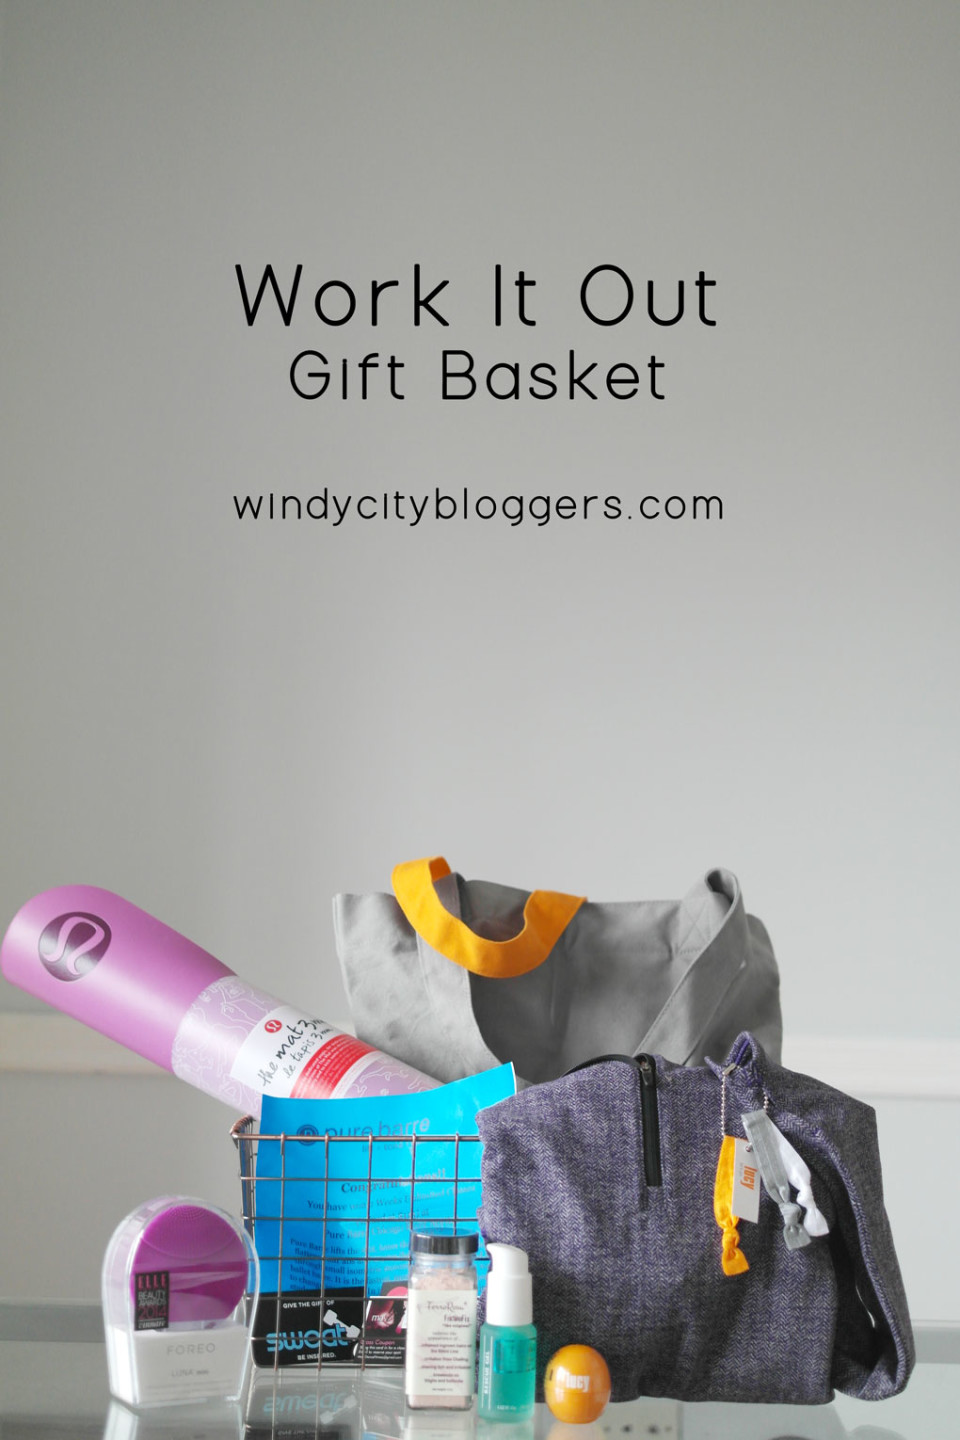 A Holiday Work Out Giveaway Just For You!